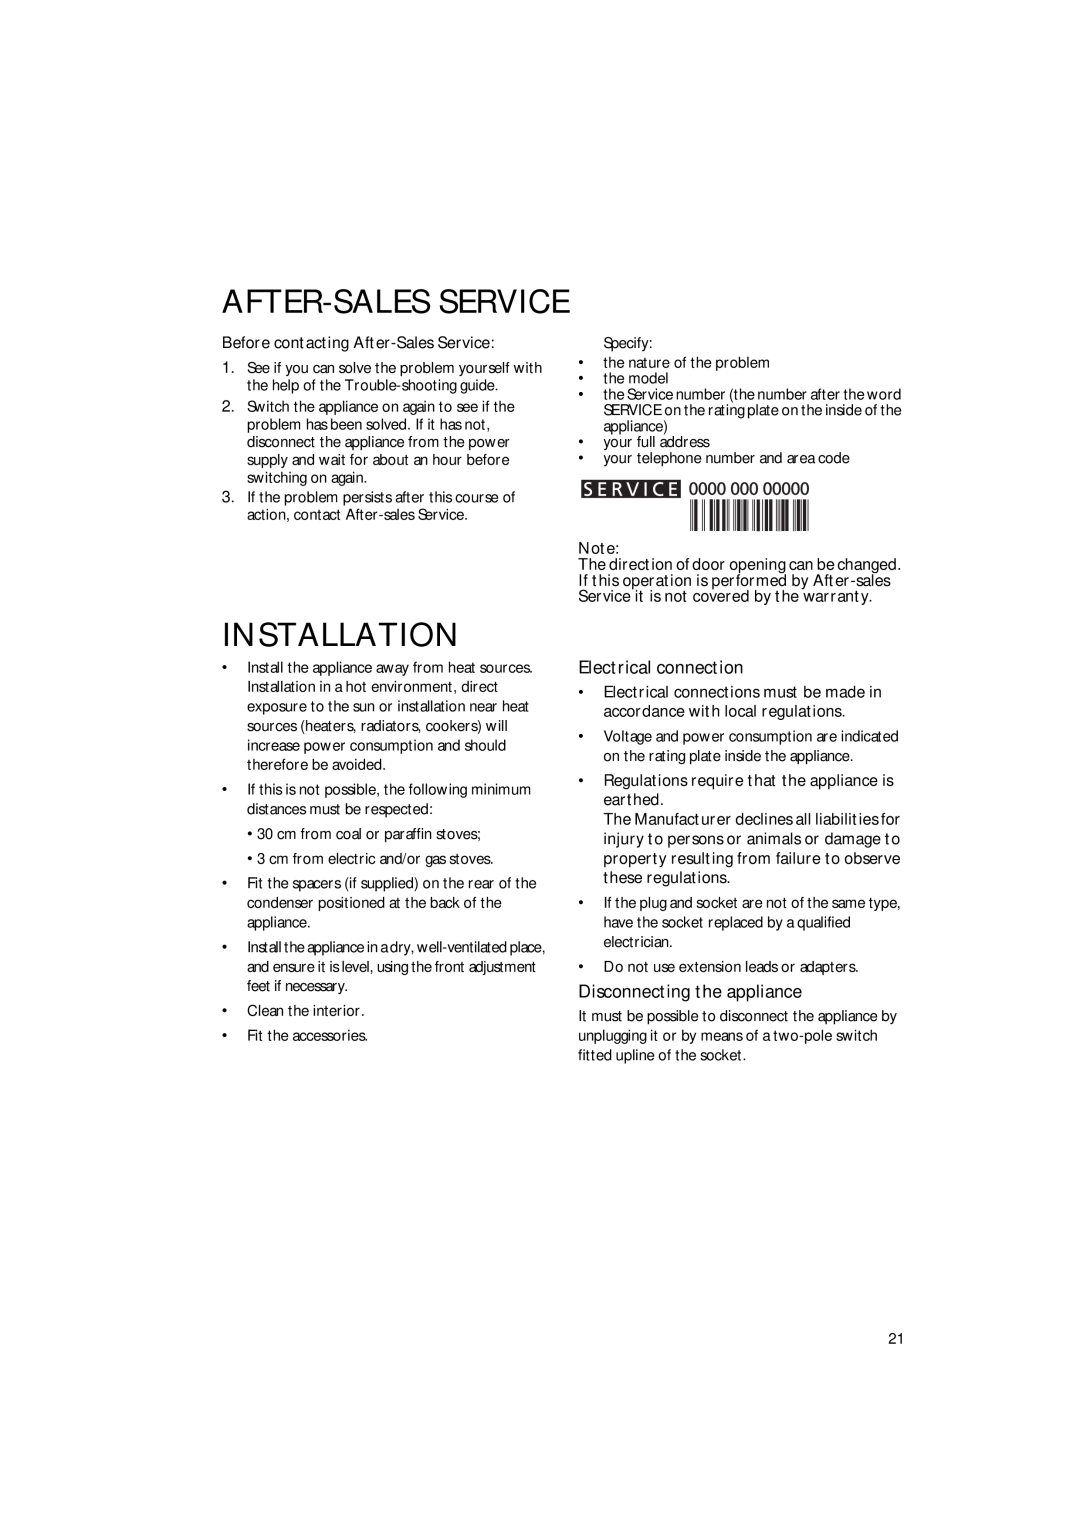 Smeg FR310APL manual After-Sales Service, Installation, Electrical connection, Disconnecting the appliance 